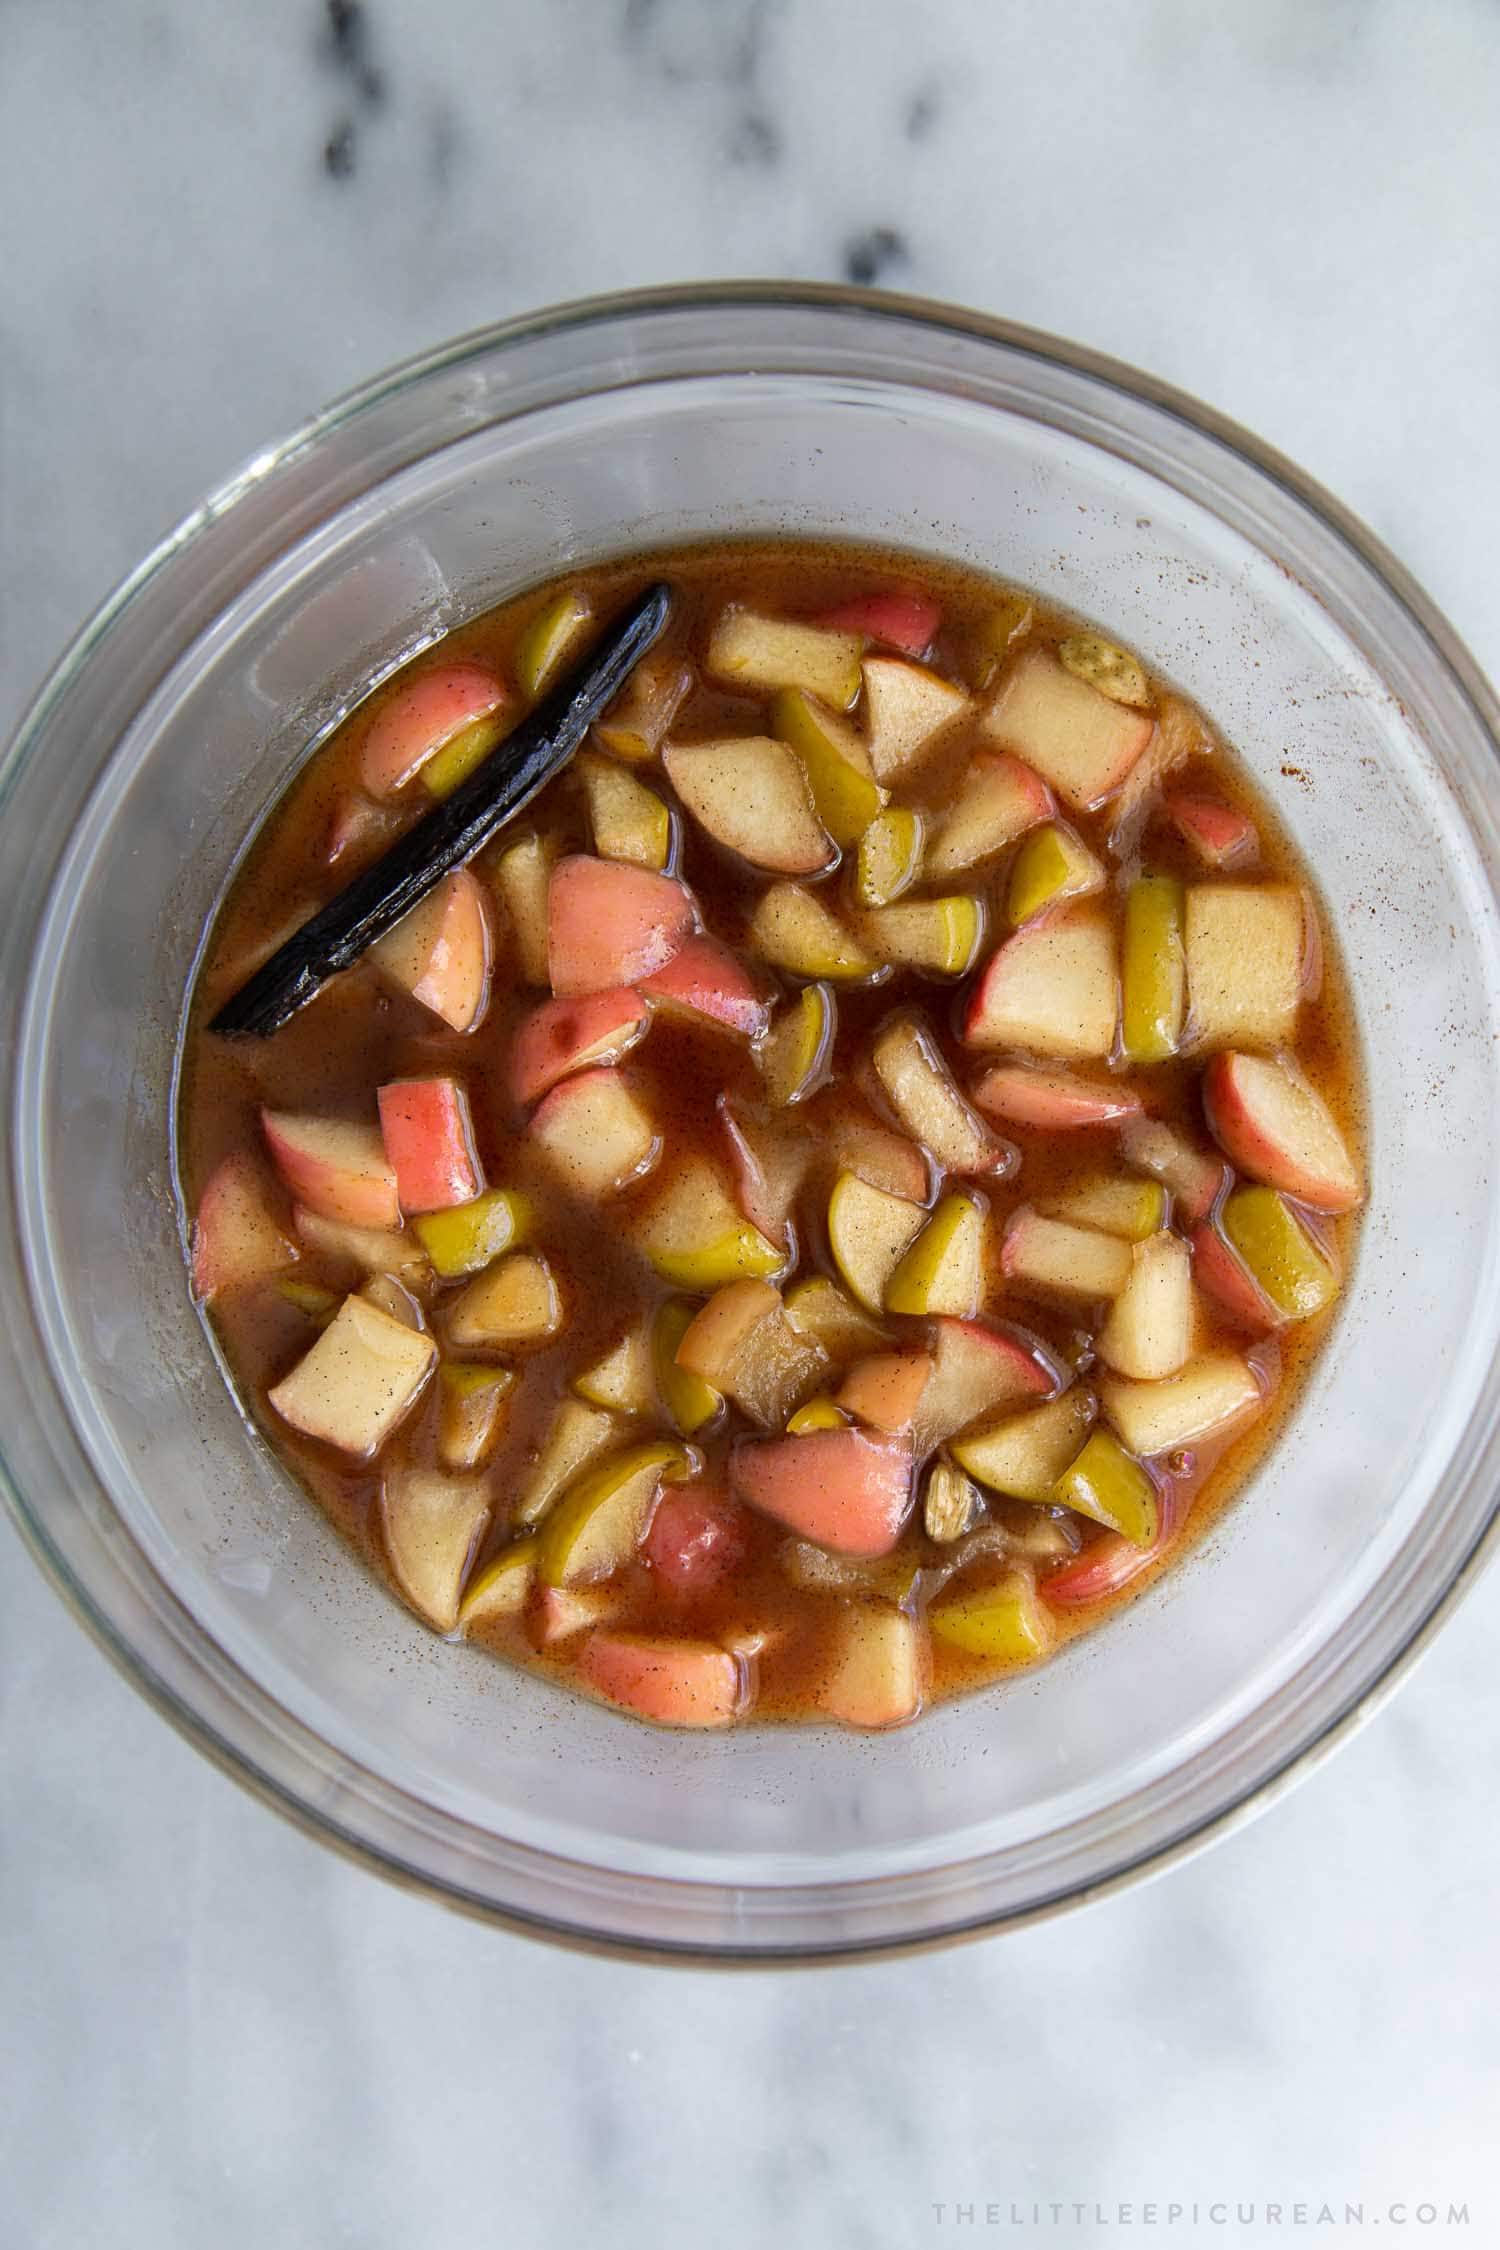 Mixture of chopped Granny Smith and Honeycrisp apple cooked in maple syrup spiced with cinnamon, nutmeg, cloves, vanilla